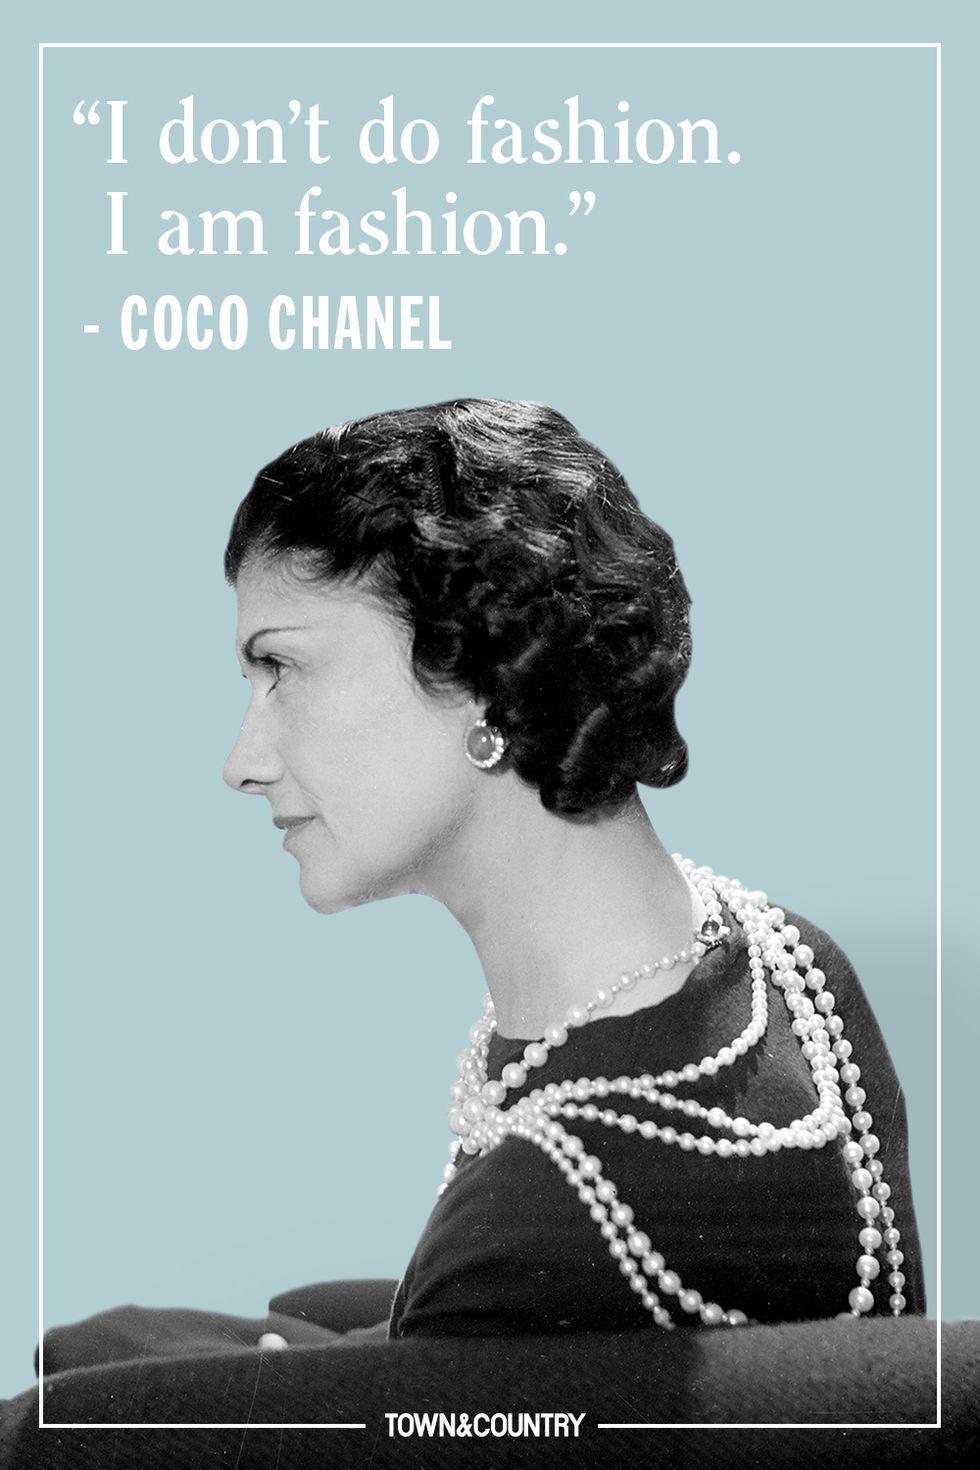 Coco Chanel Quote on Perfume